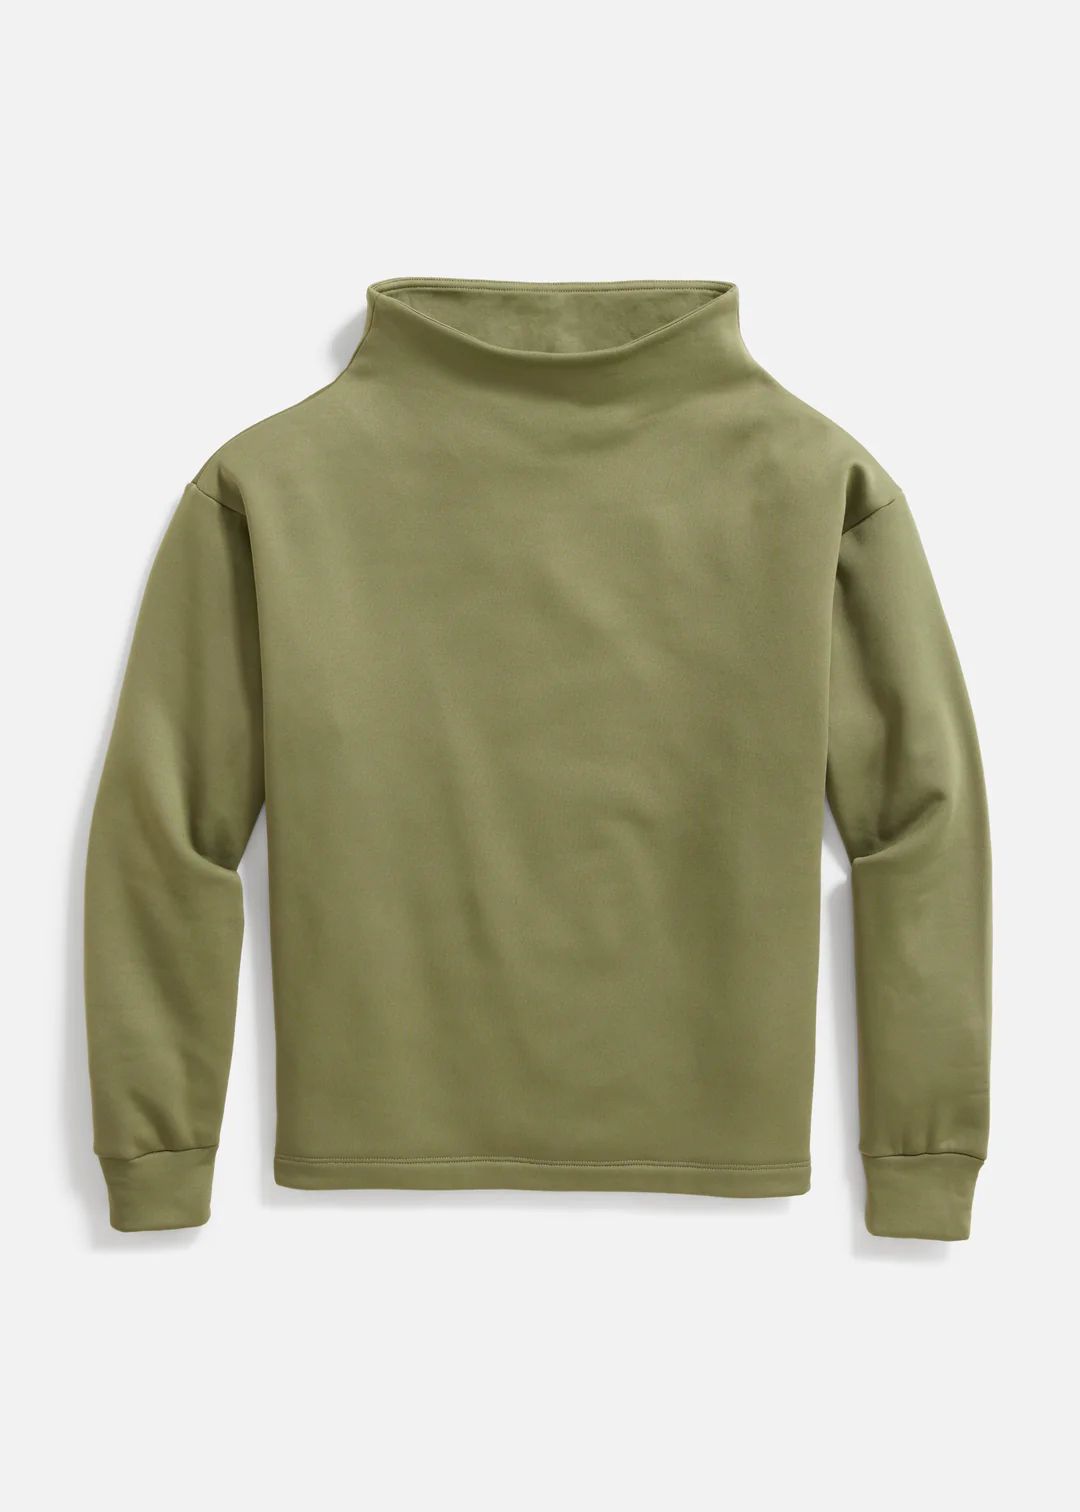 Demi Mock Neck in Power Stretch (Army Green) | Dudley Stephens